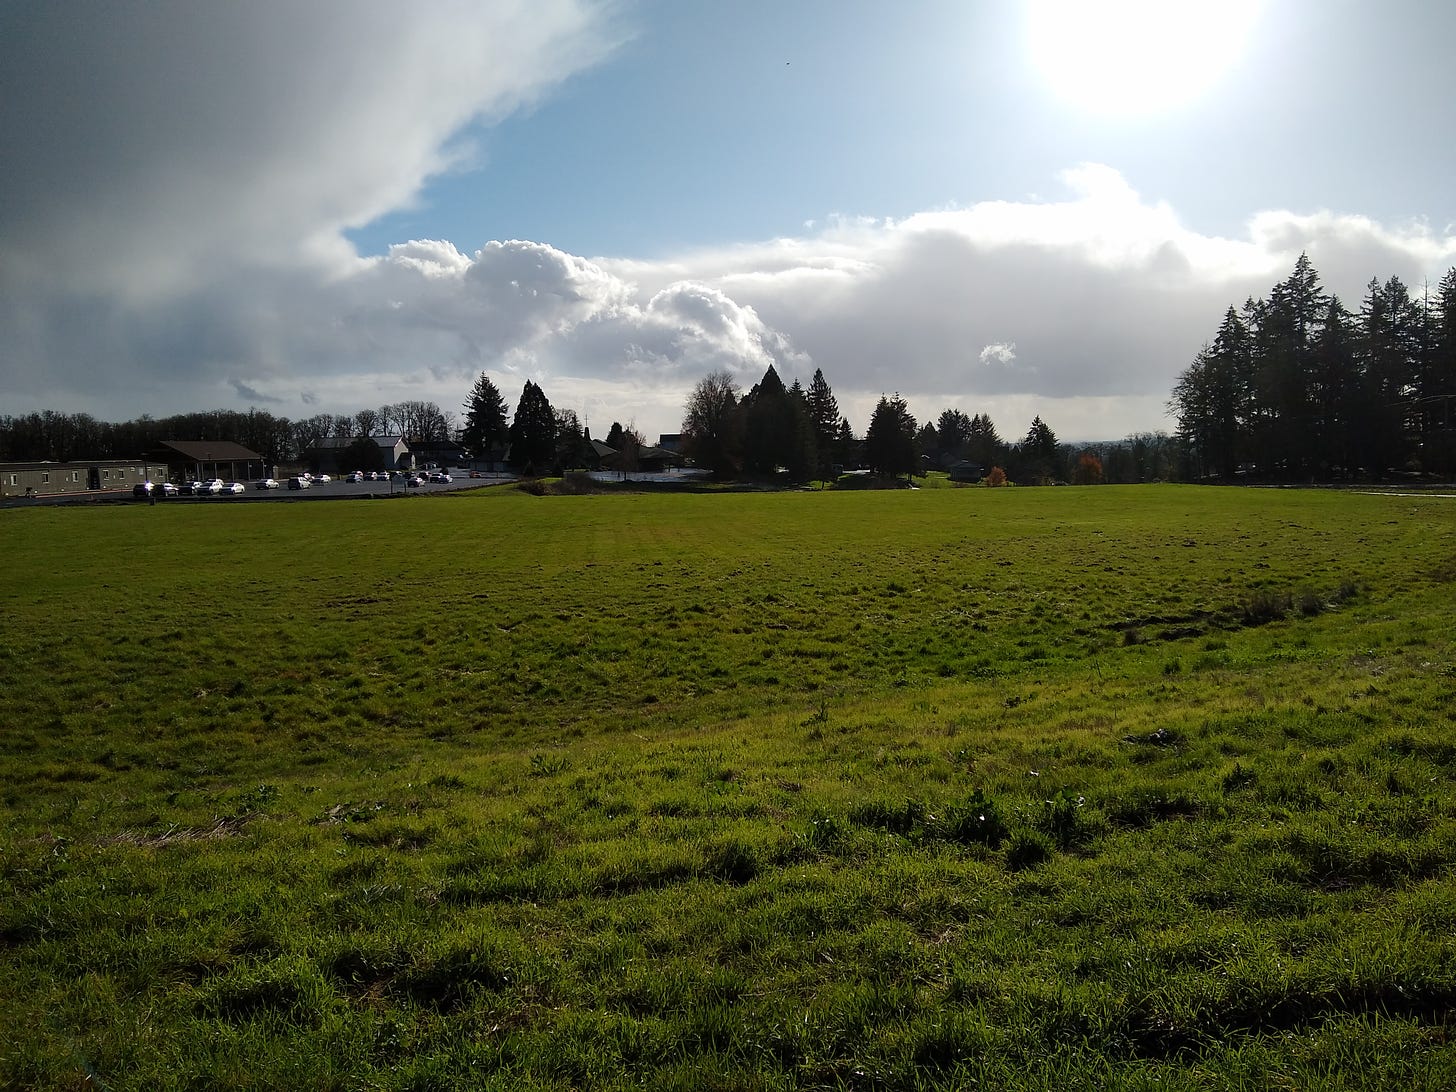 A green field, a sunny sky with big puffy white clouds